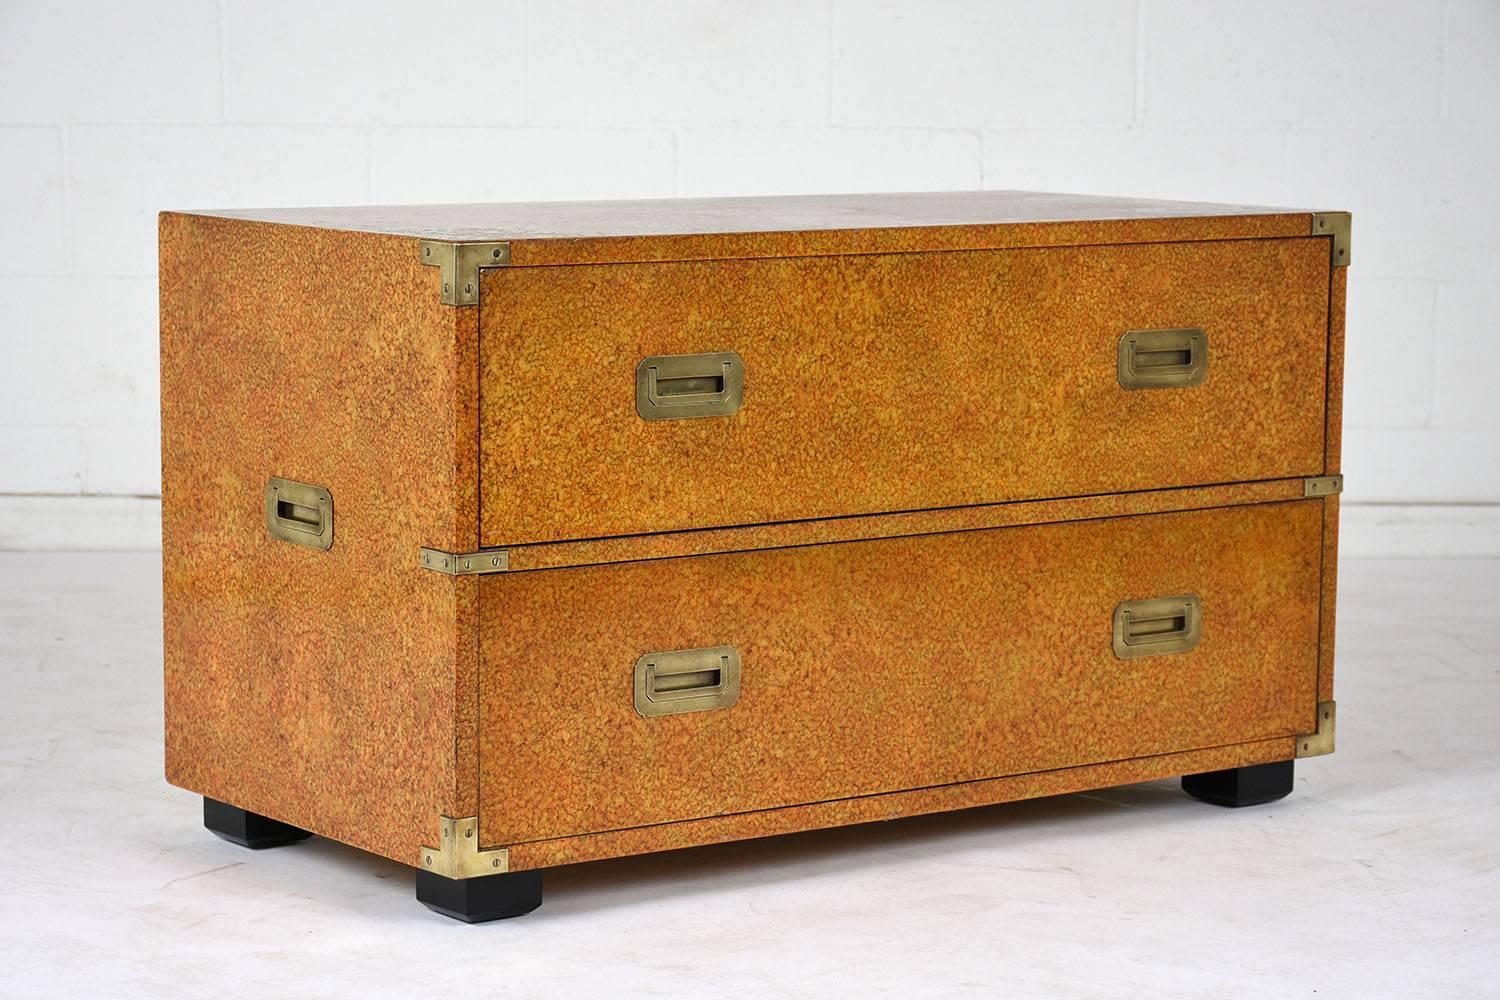 This 1970s campaign style chest of drawers is made by Henredon and features wood stained in a natural wood color with a sponge technique. The low chest has two drawers with flush brass drawer pulls. The chest has brass corner accents and brass